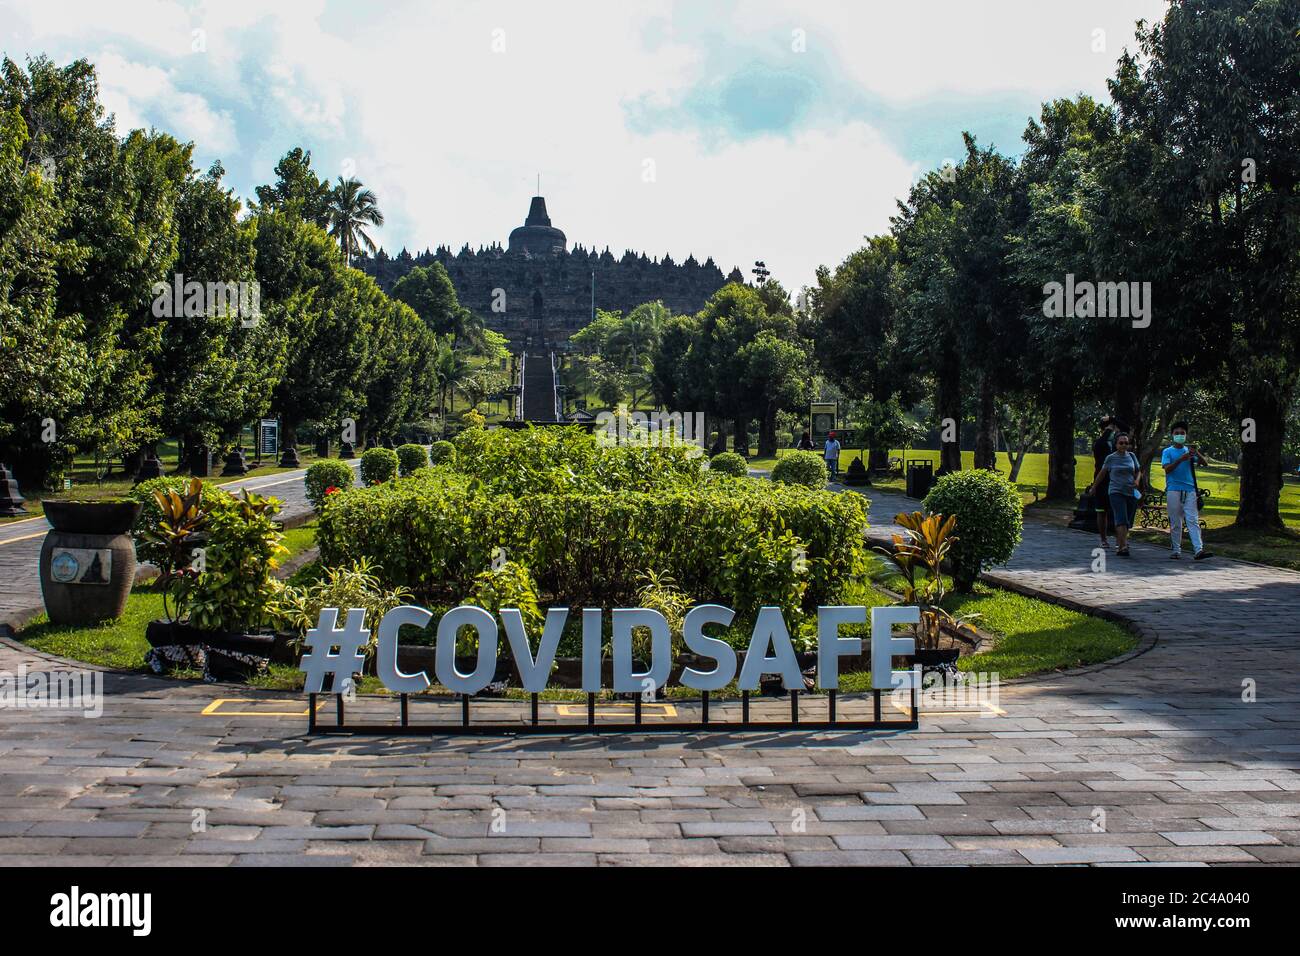 Magelang, CENTRAL JAVA, INDONESIA. 25th June, 2020. 317/5000.Tourists visit Borobudur Temple as a 9th century world heritage in Magelang, Central Java, Indonesia on Thursday, June 26, 2020. The number of victims of corona virus infection in Indonesia is increasing. The Indonesian government also allows businesses to continue operations amid increasing economic pressure. Credit: Slamet Riyadi/ZUMA Wire/Alamy Live News Stock Photo